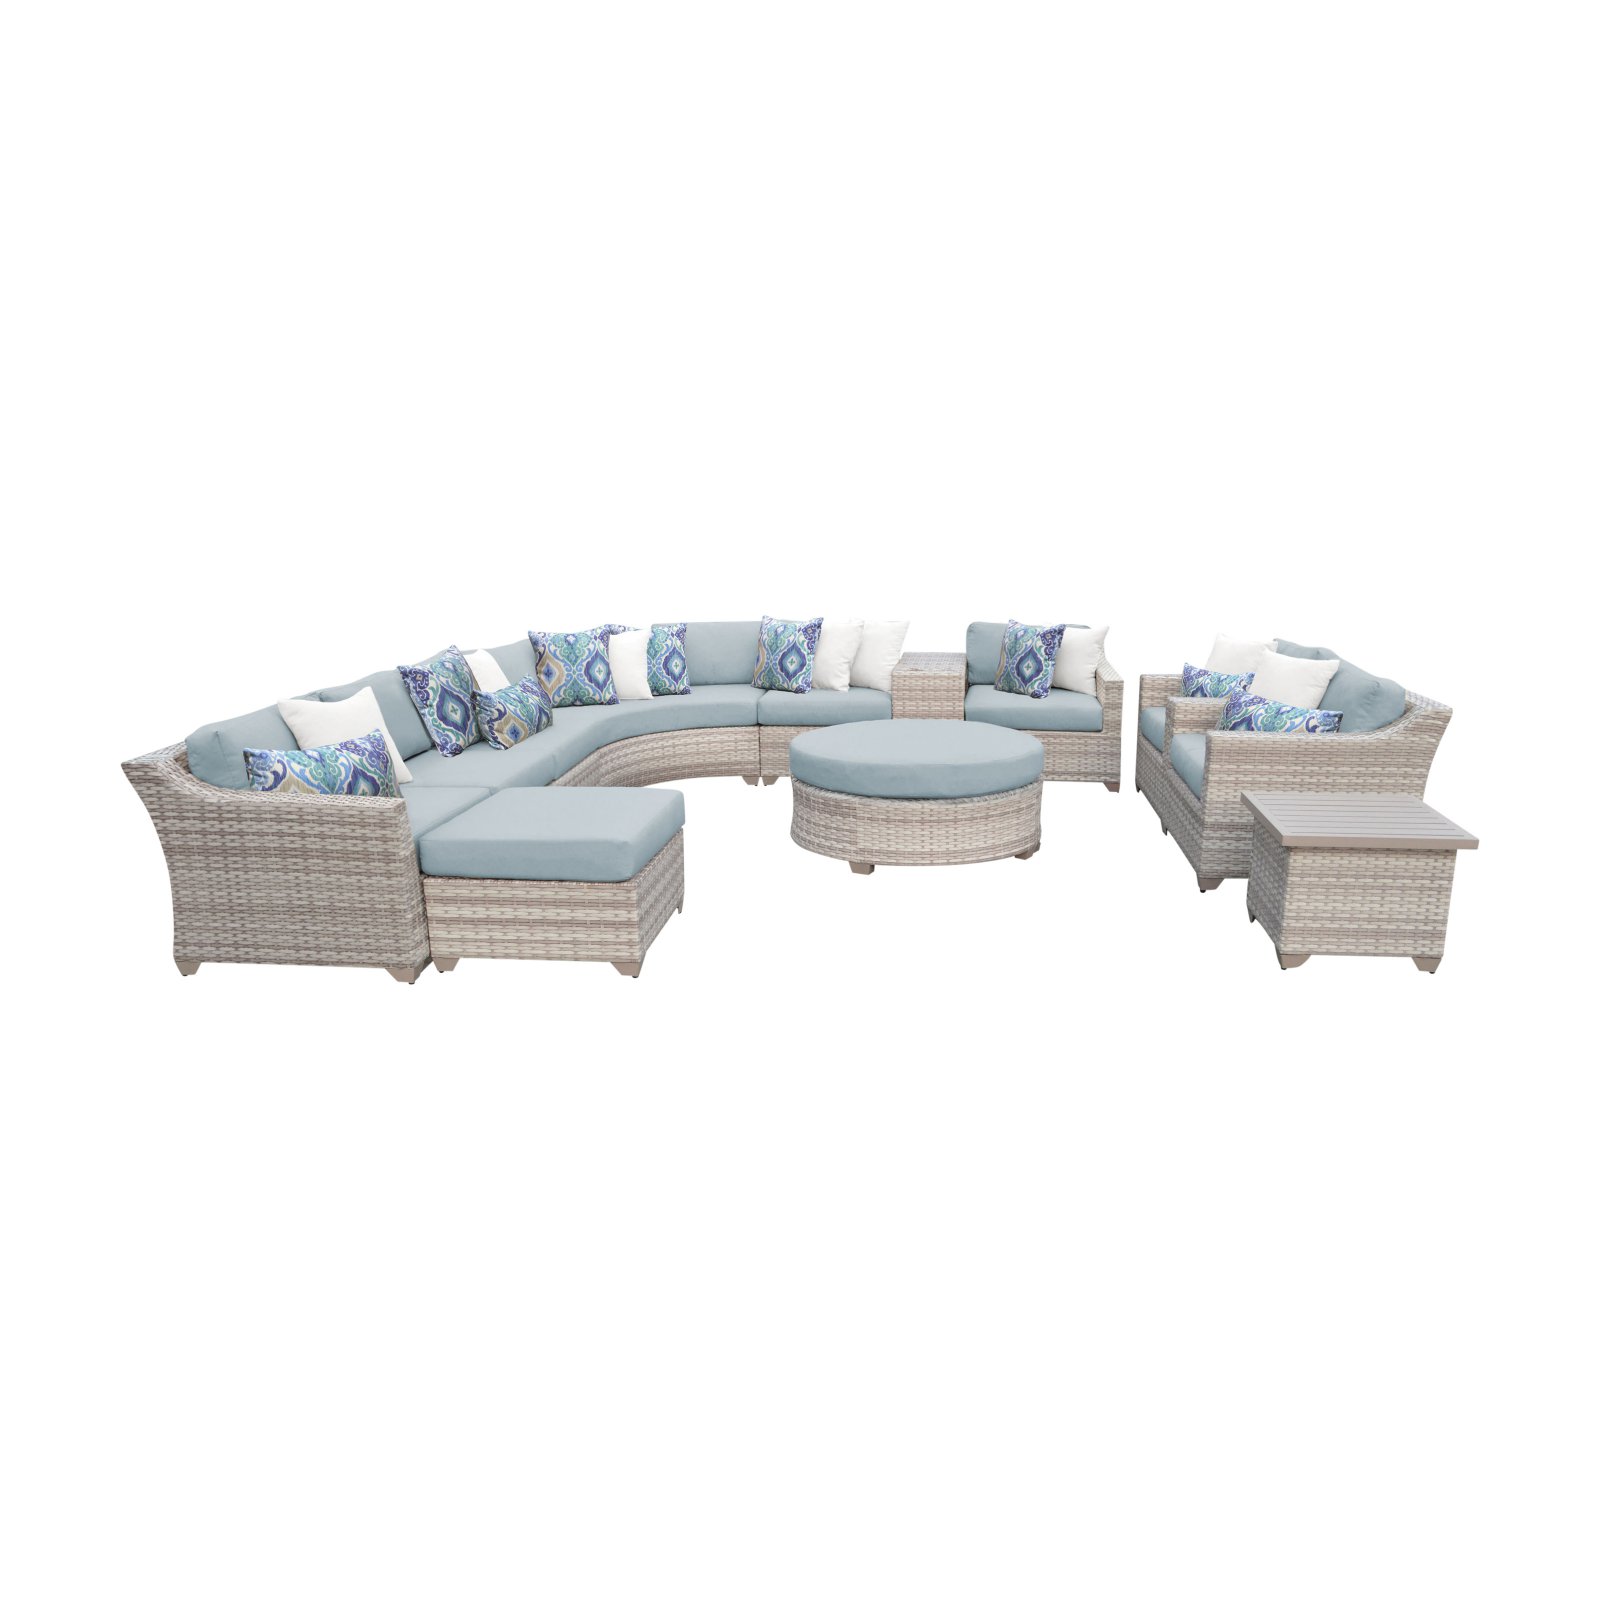 TK Classics Fairmont All-Weather Wicker 12 Piece Round Sectional Patio Conversation Set - image 2 of 2